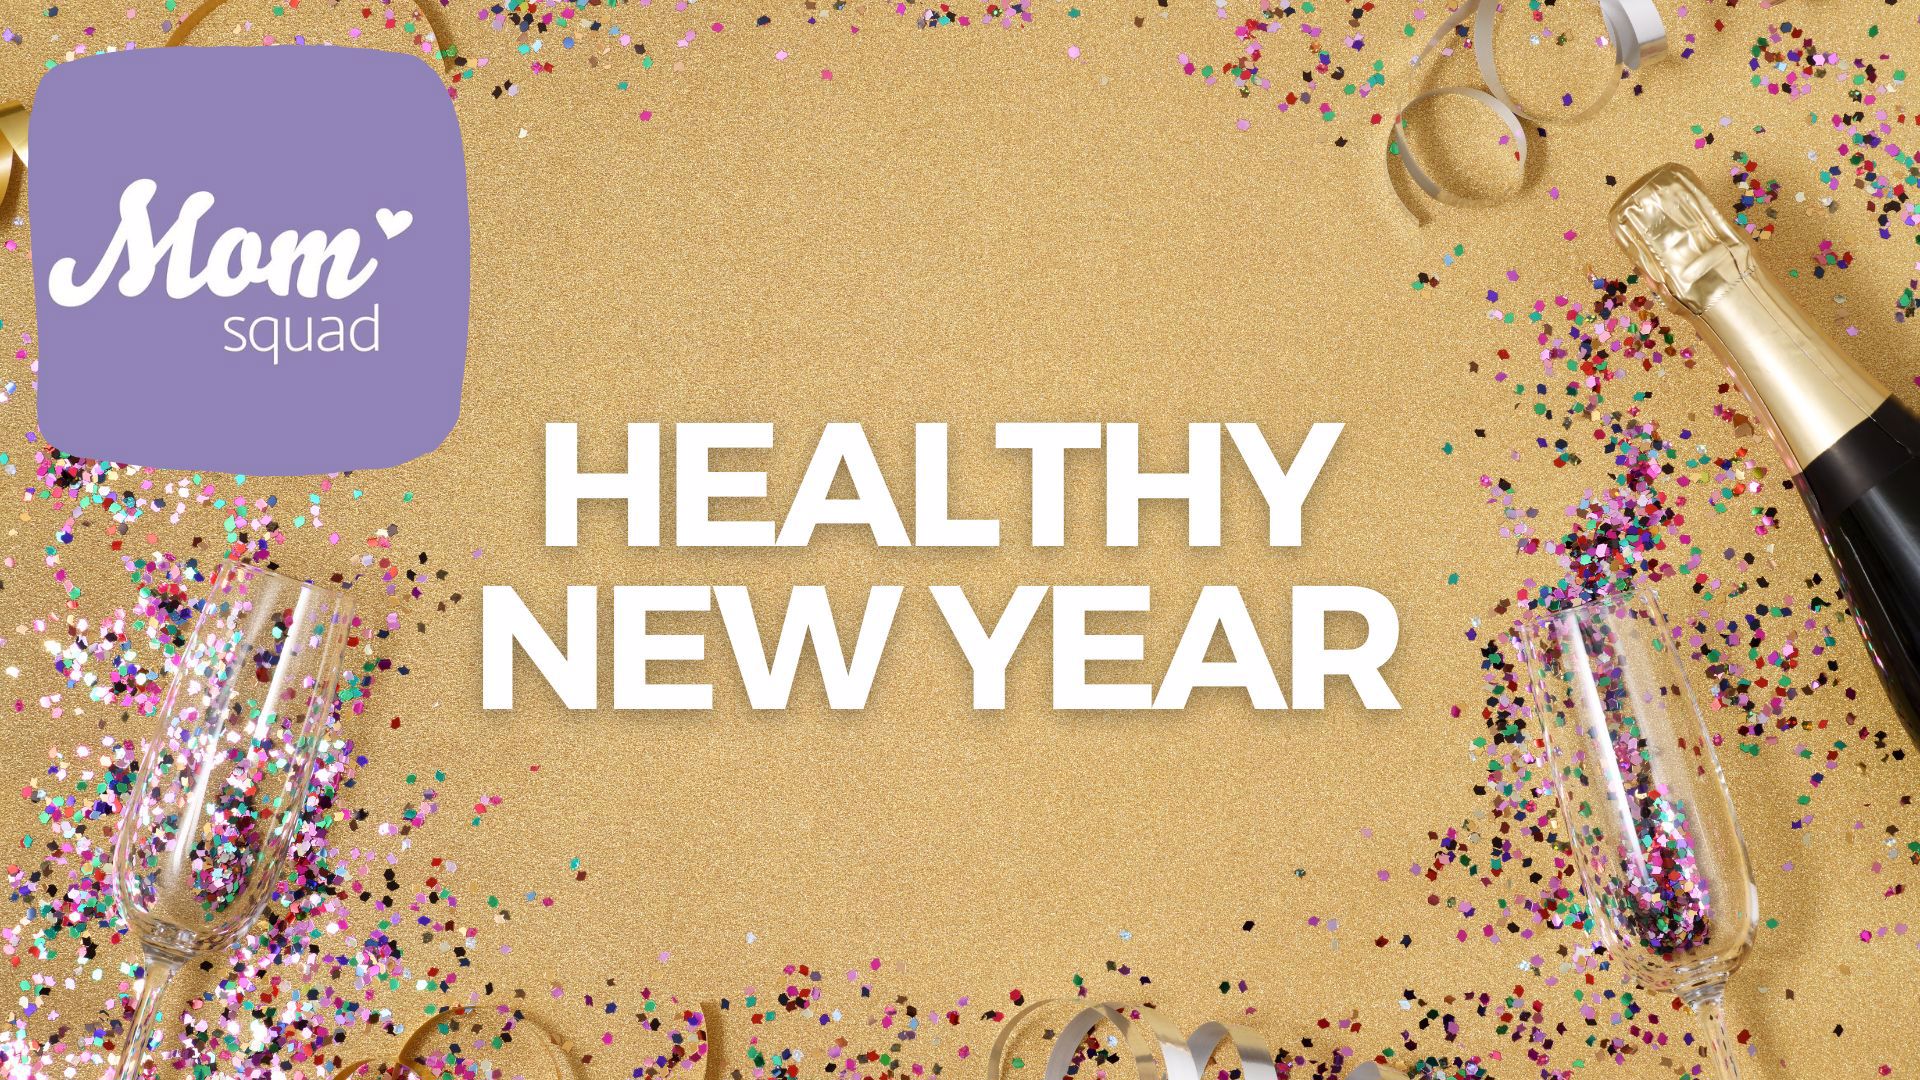 WKYC's Maureen Kyle sits down with dietician Kristin Kirkpatrick to discuss healthy new year tips, as well as chats with other moms on what they are doing in 2023.